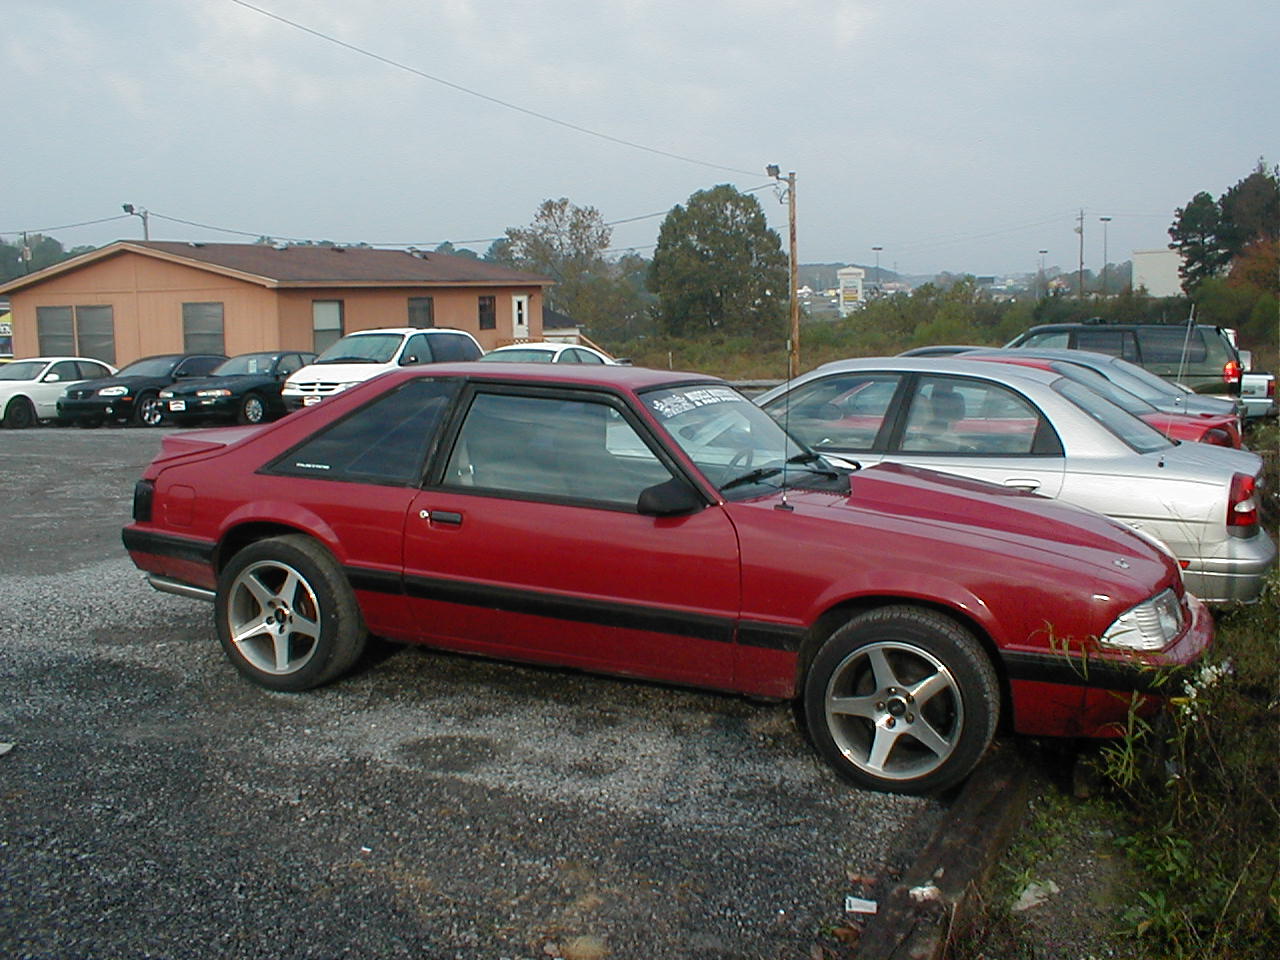 1989 Ford mustang lx specs #1